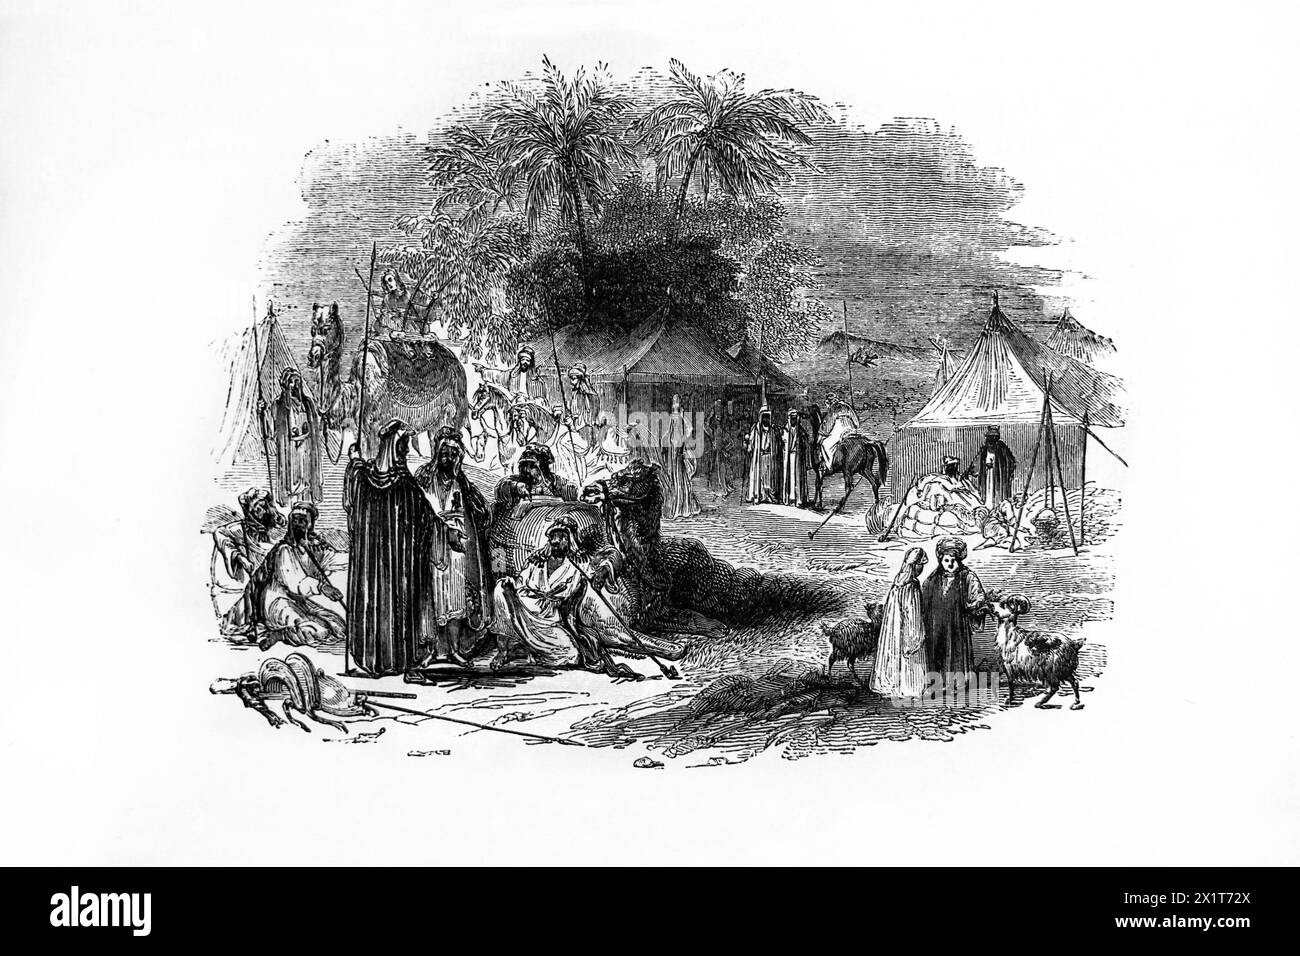 Wood Engraving of a Bedouin Encampment in 19th Century Illustrated Family Bible Stock Photo